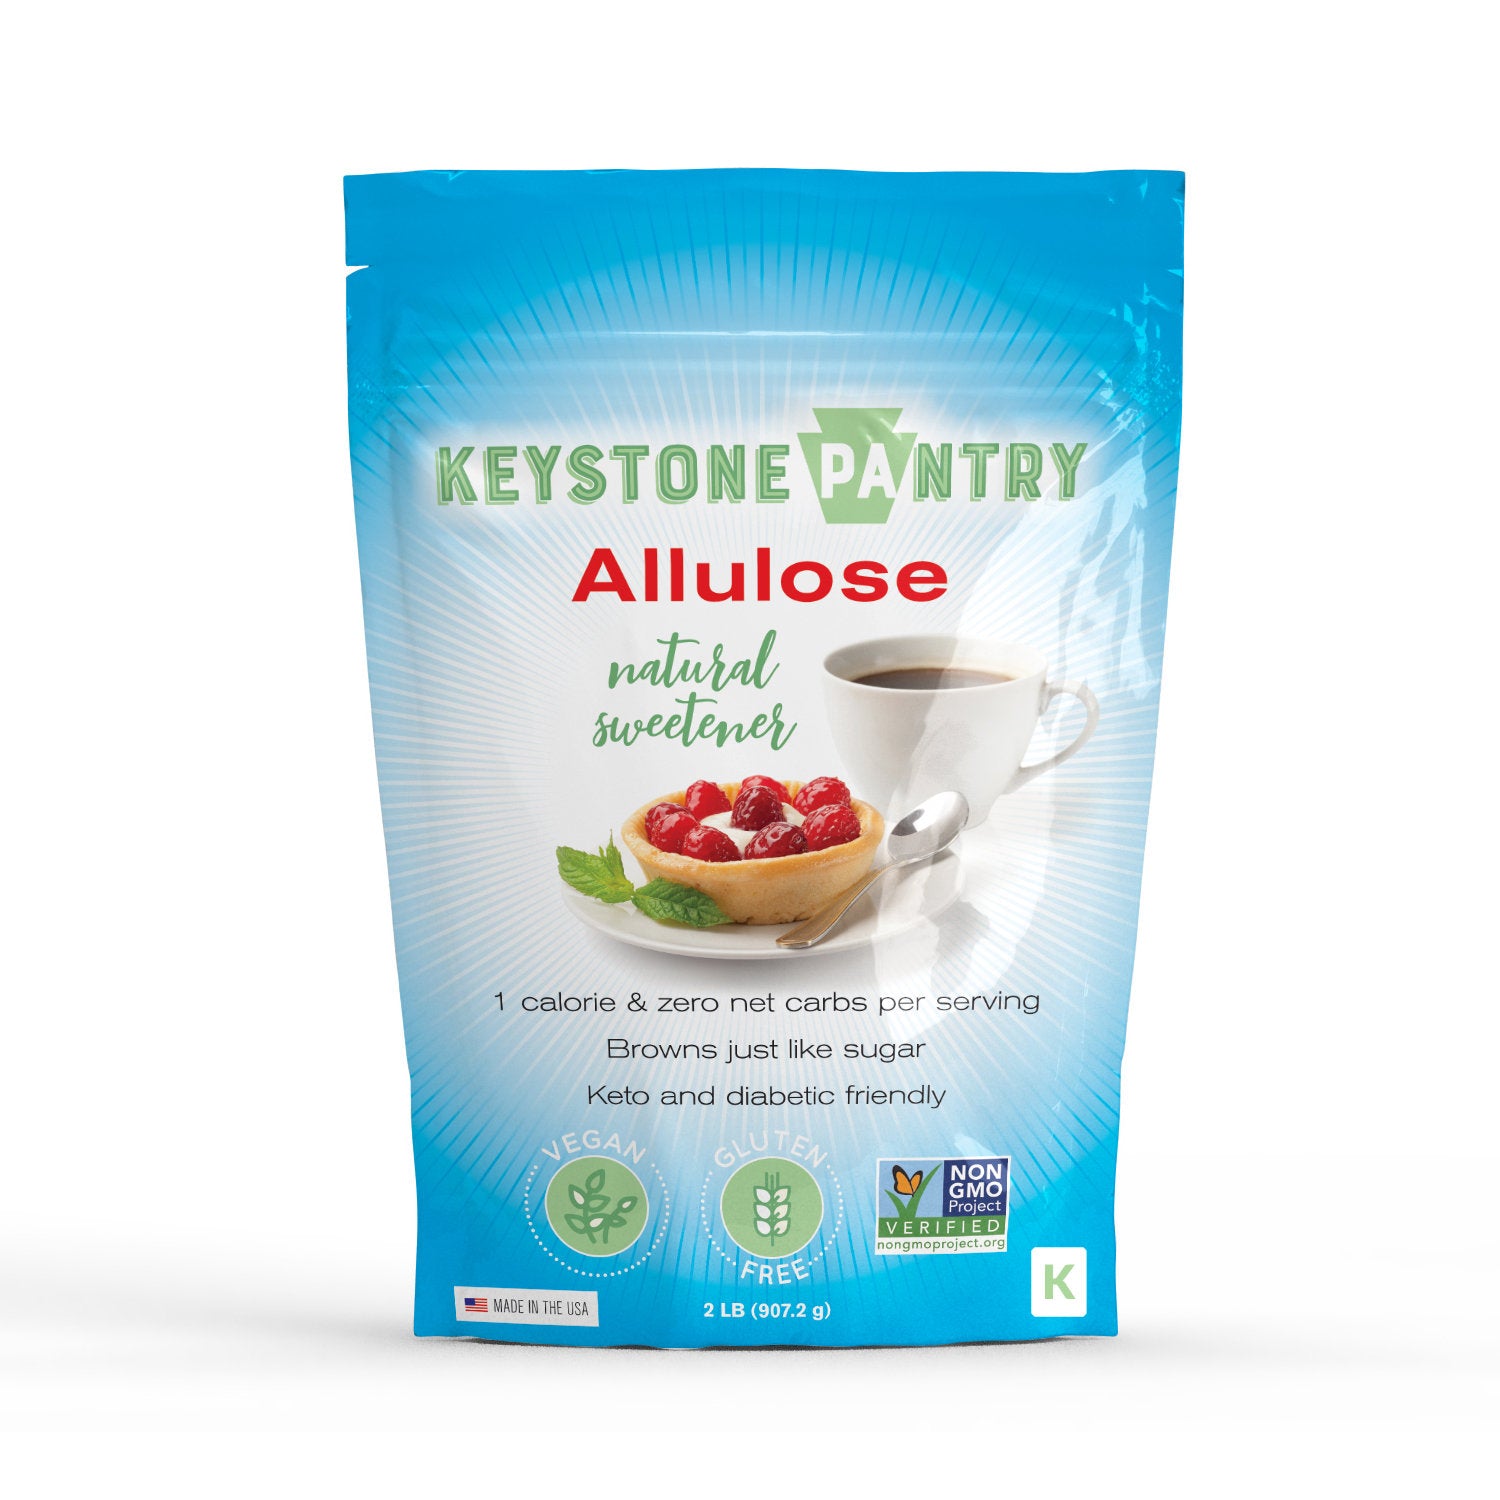 Keystone Pantry Allulose Powder 2lb Bag Low-Calorie Sugar Substitute With FREE $14.99 CookBook